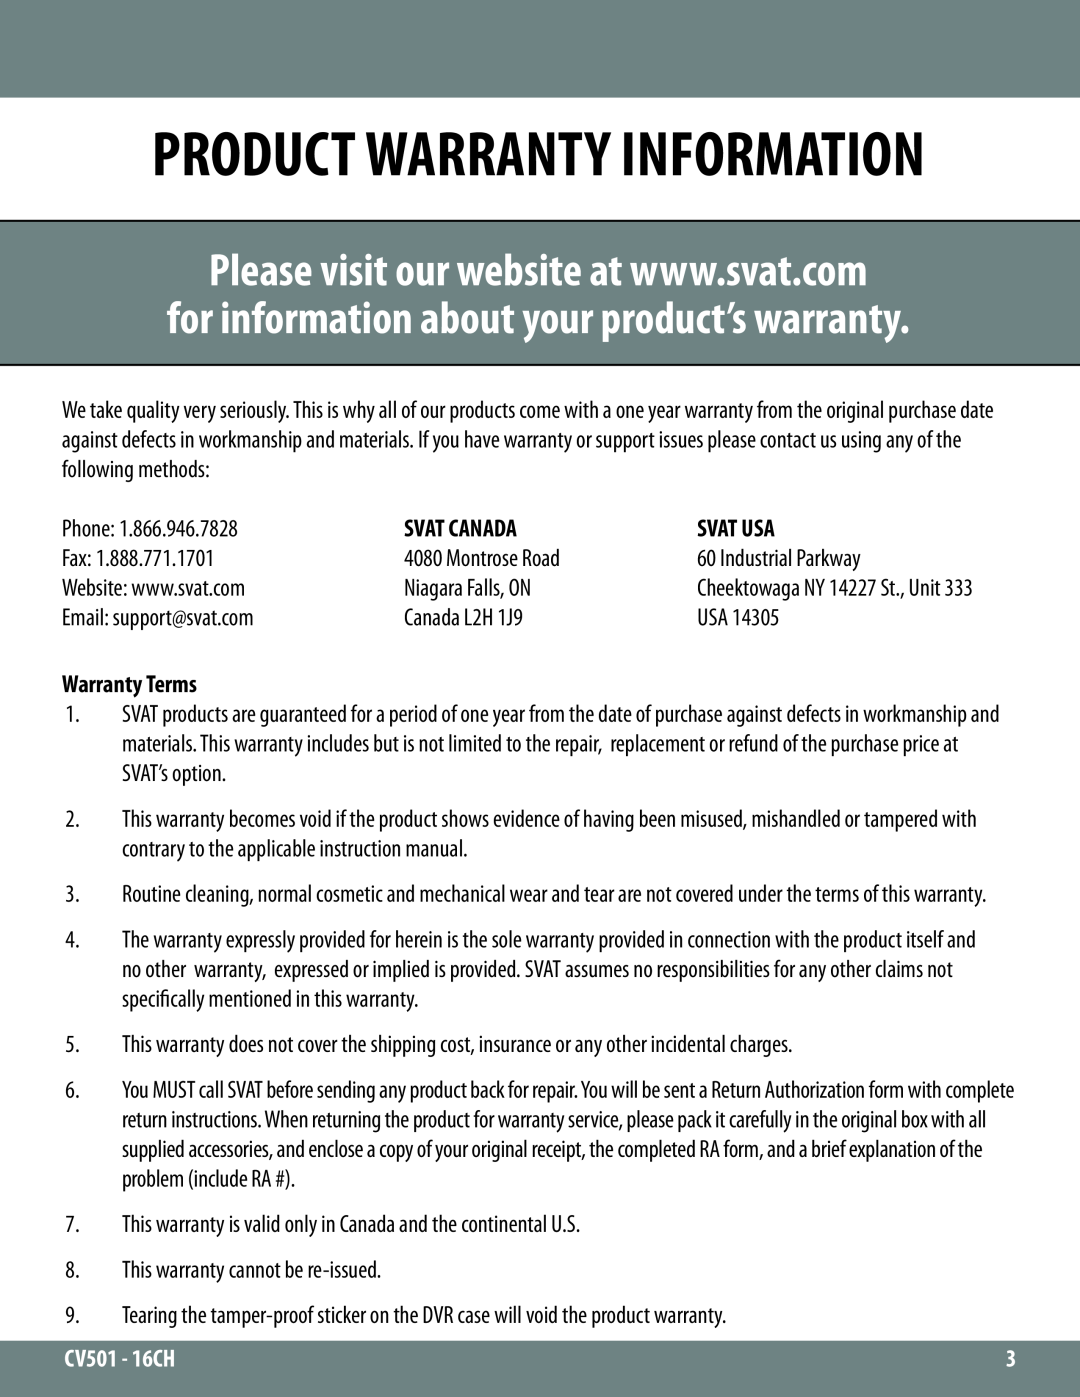 SVAT Electronics CV501 - 16CH Product Warranty Information, for information about your product’s warranty, Svat Canada 